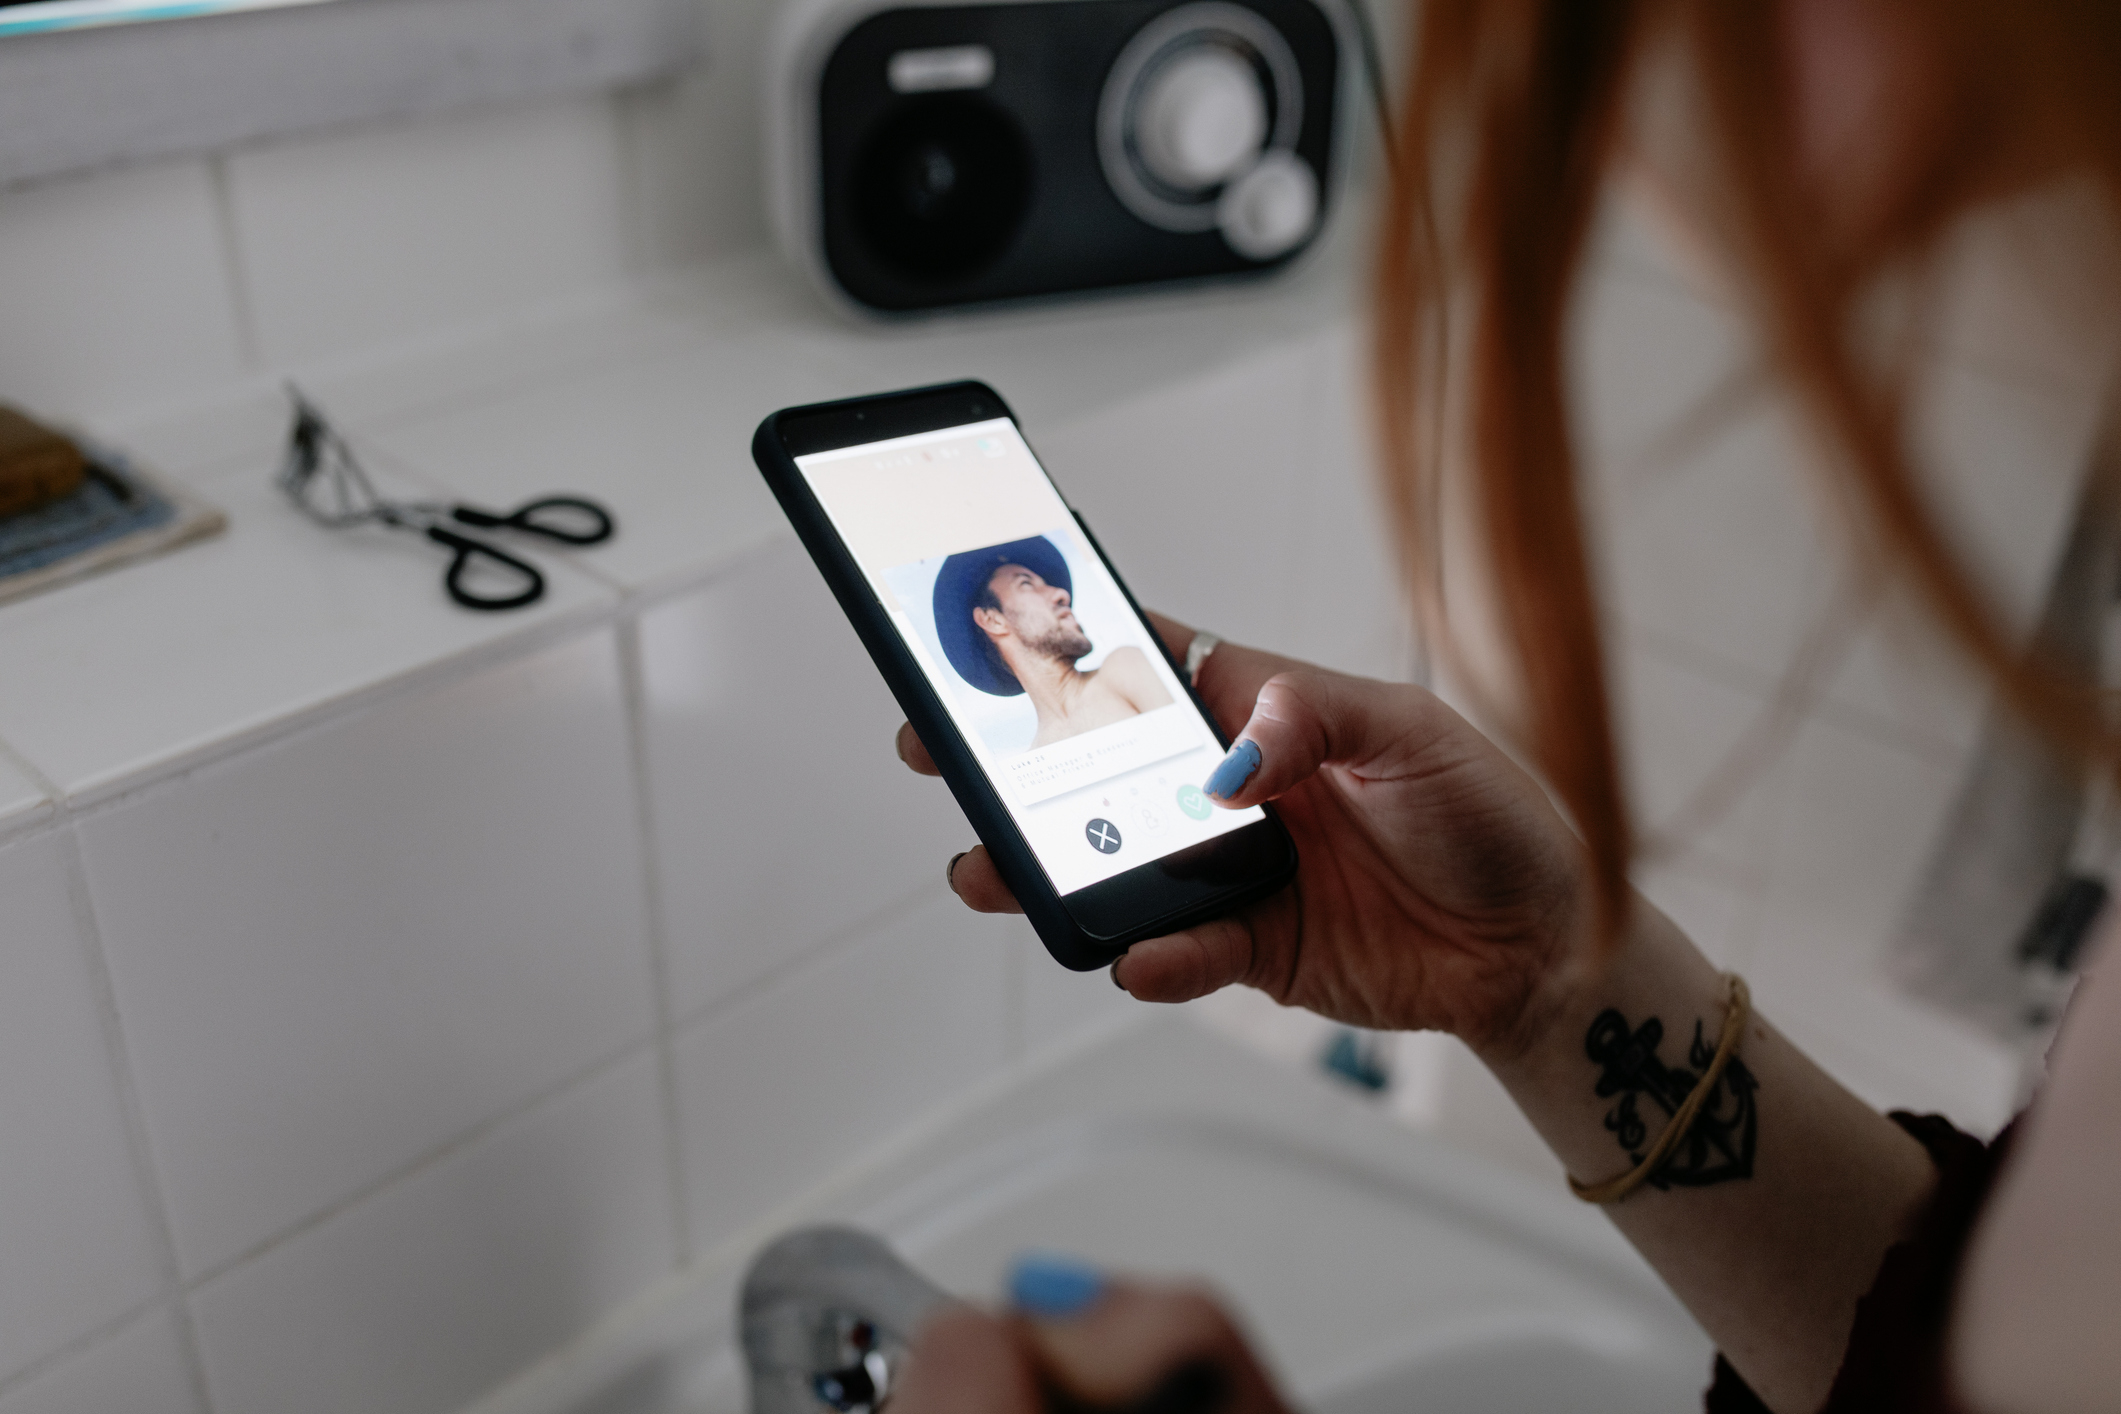 Person holding a phone displaying a dating profile picture of another person by a sink with personal grooming tools